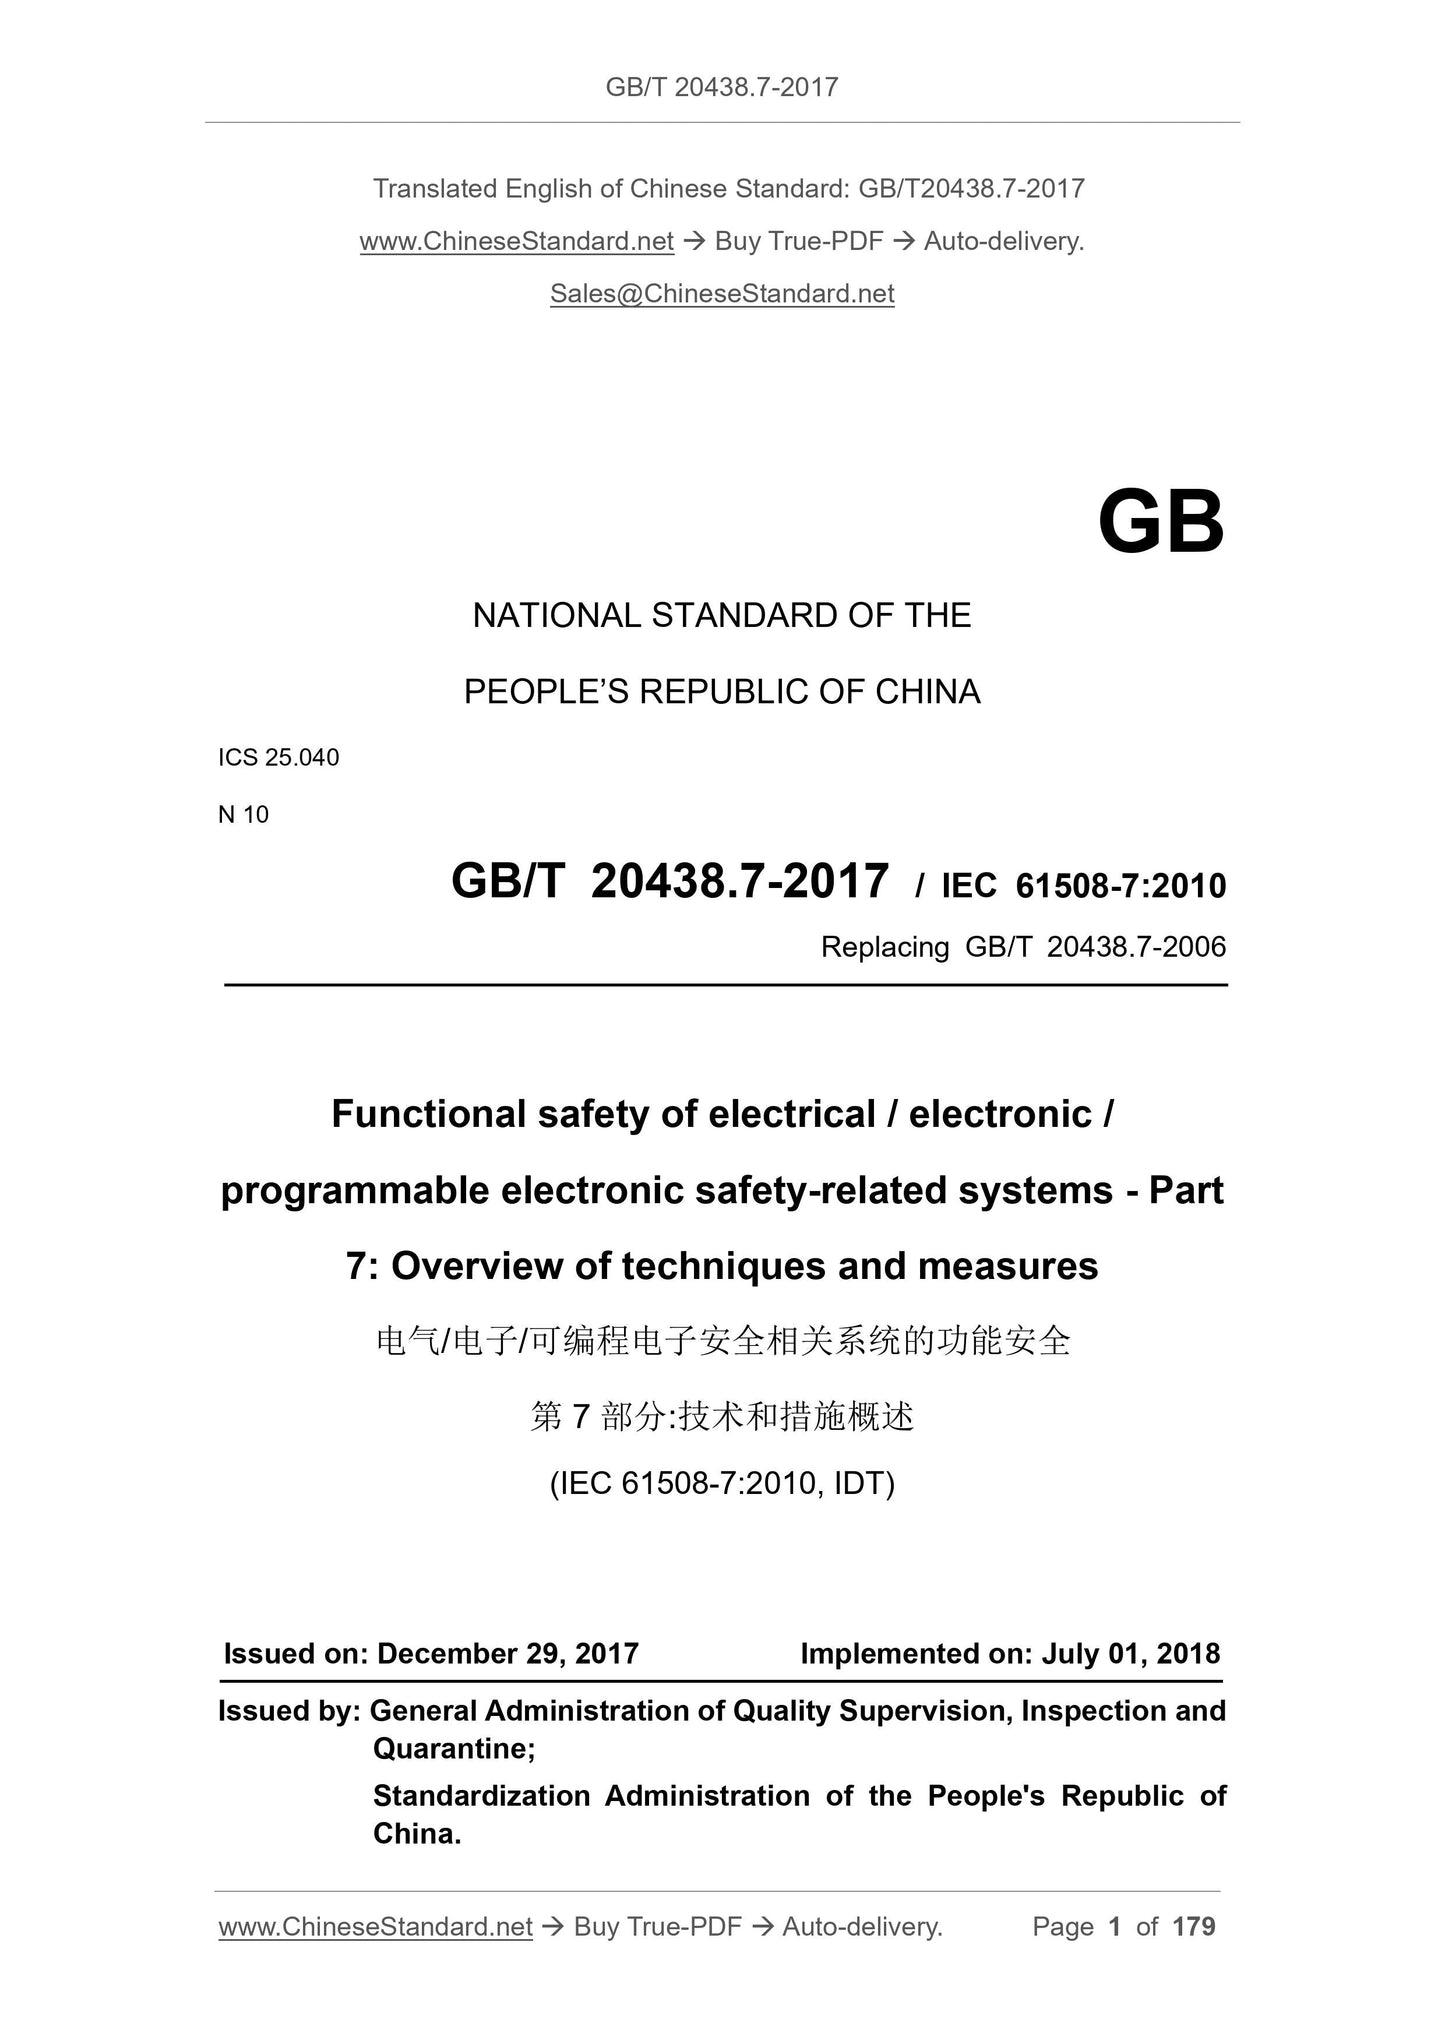 GB/T 20438.7-2017 Page 1